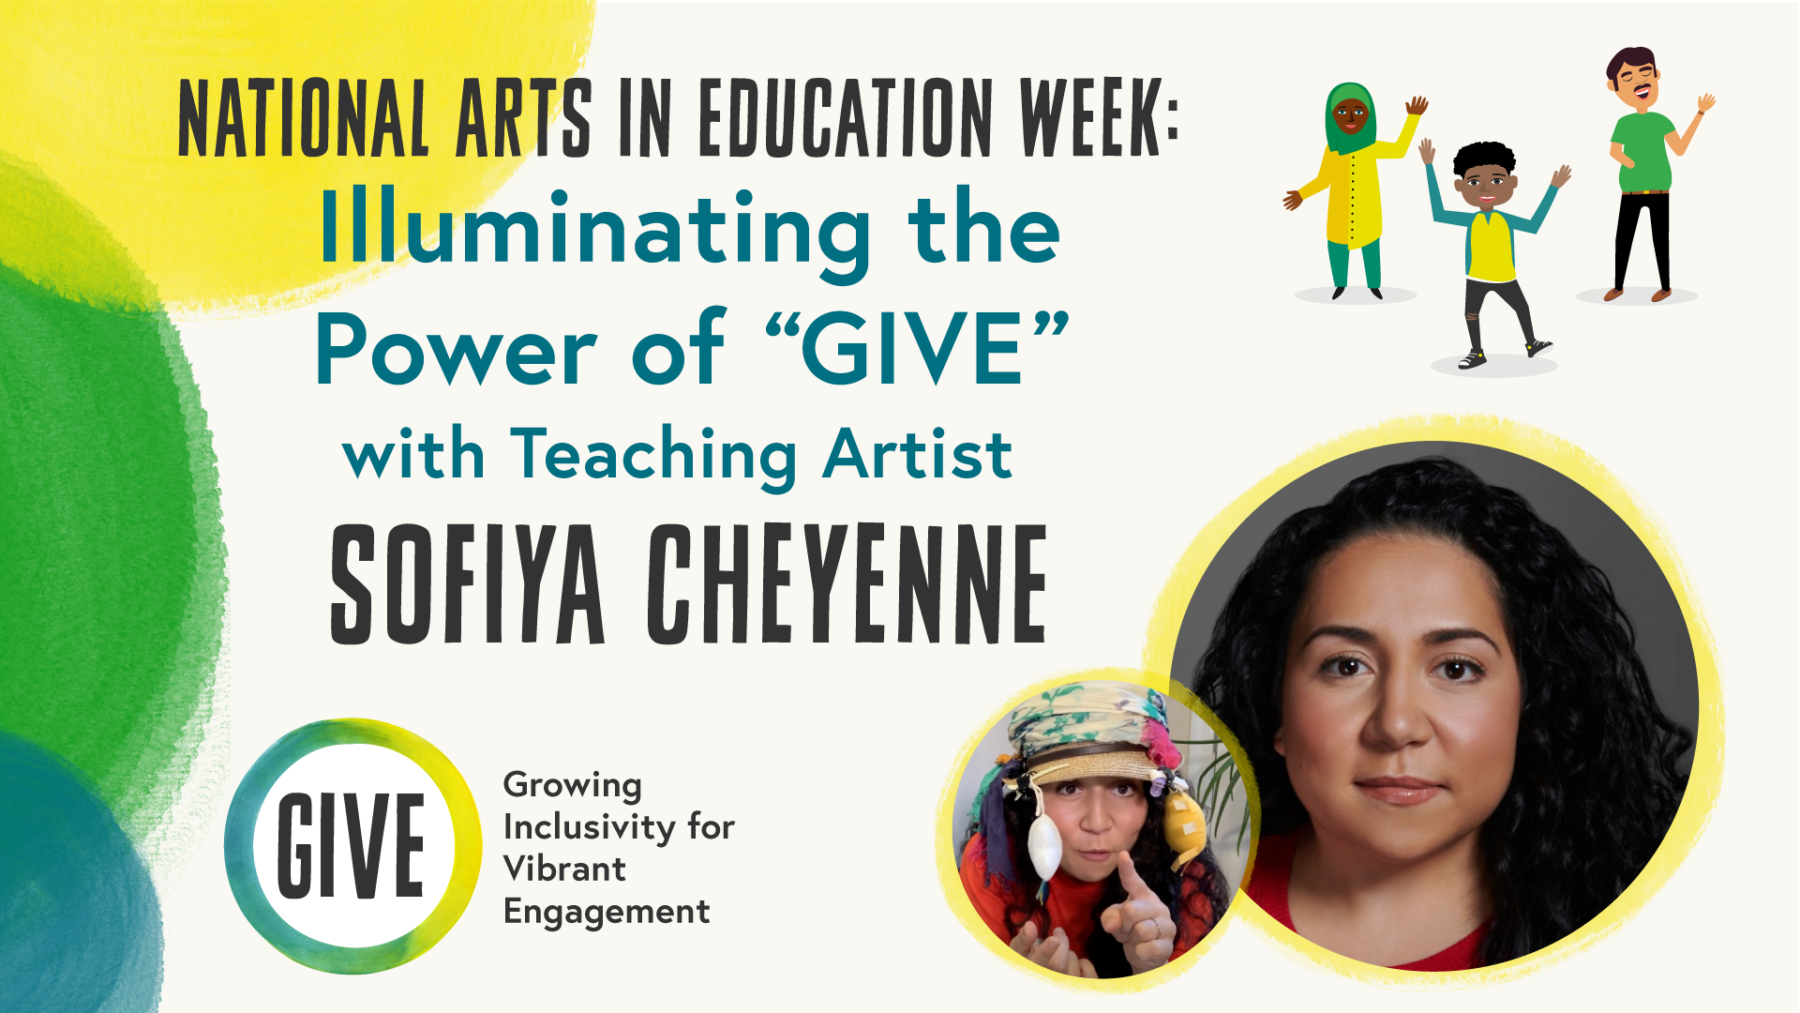 National Arts in Education Week Illuminating the Power of "GIVE" with